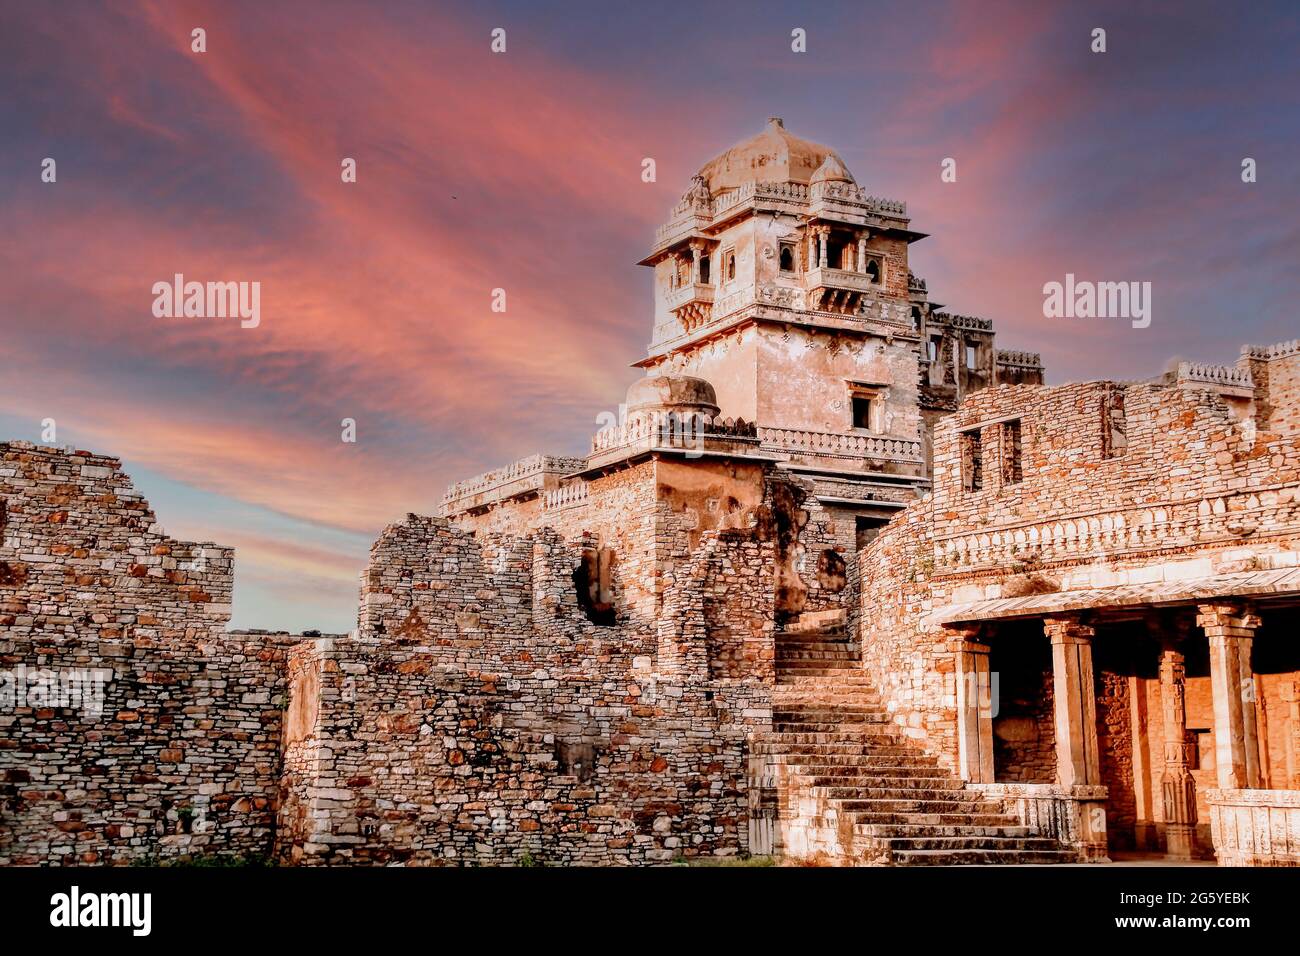 The Chittorgarh Fort is one of the largest forts in India. It is a UNESCO World Heritage Site. The fort was the capital of Mewar. Stock Photo